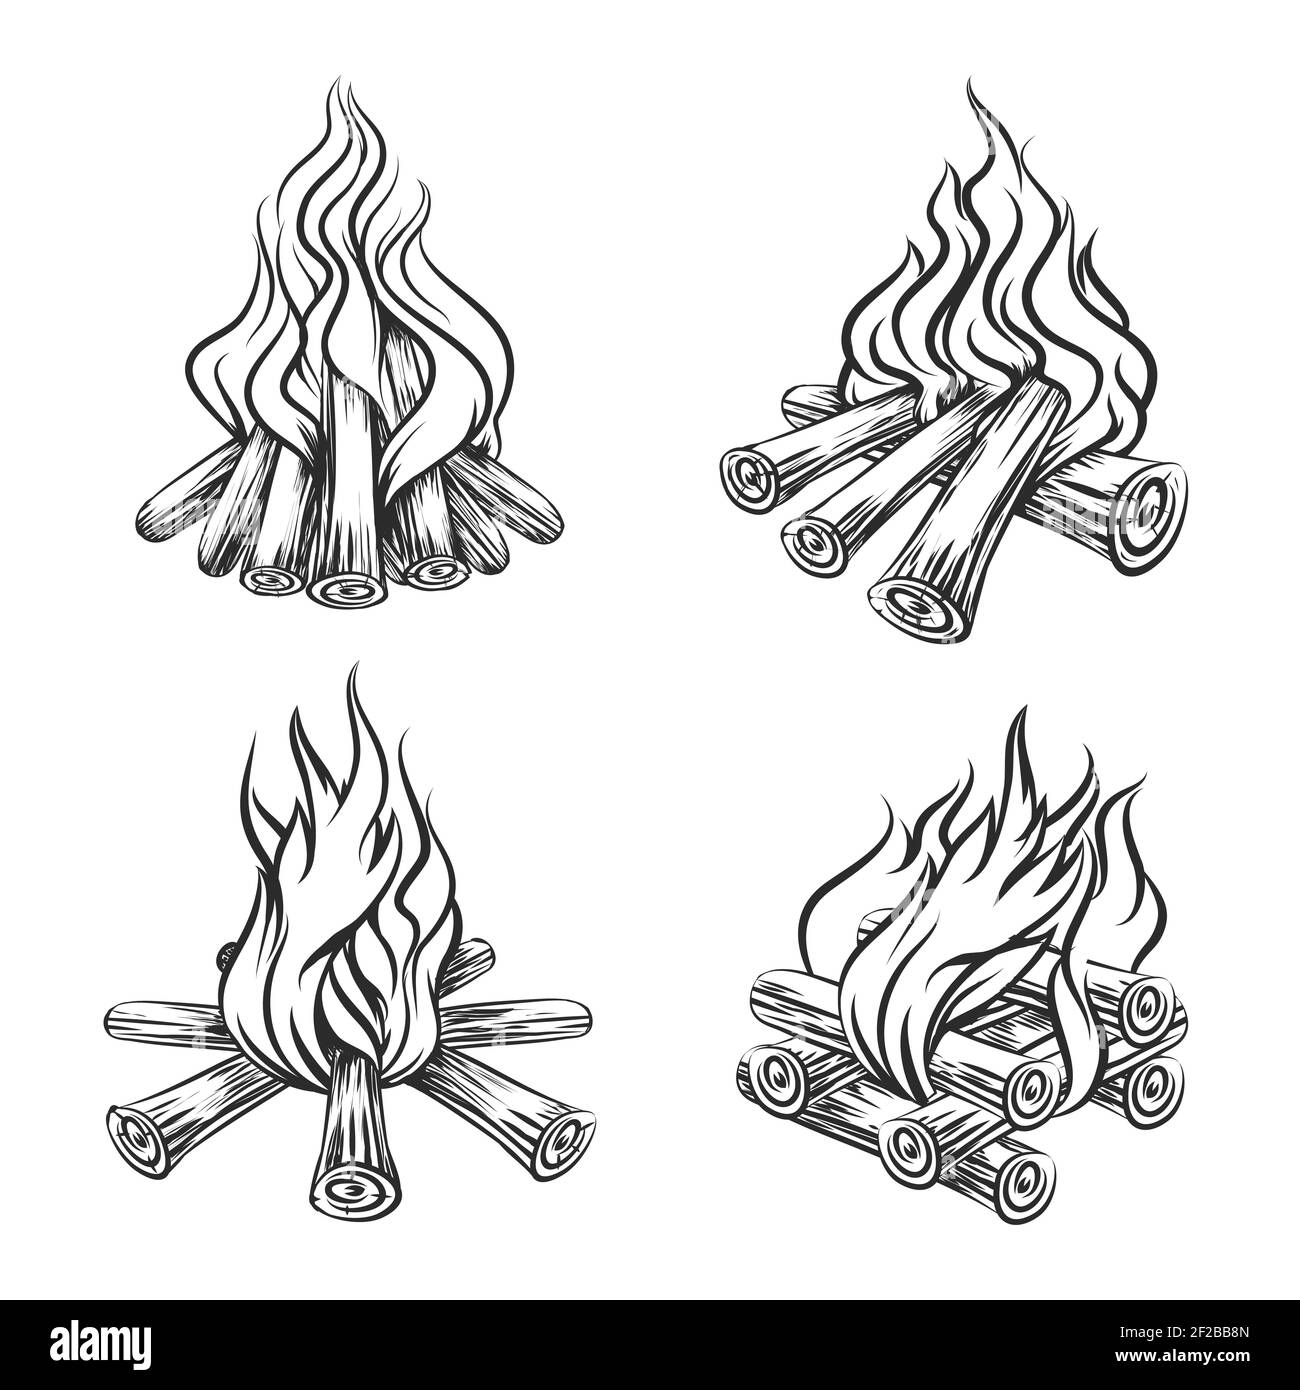 Hand drawn vector bonfire set. Flame and burn, firewood energy, fireplace sketch illustration Stock Vector